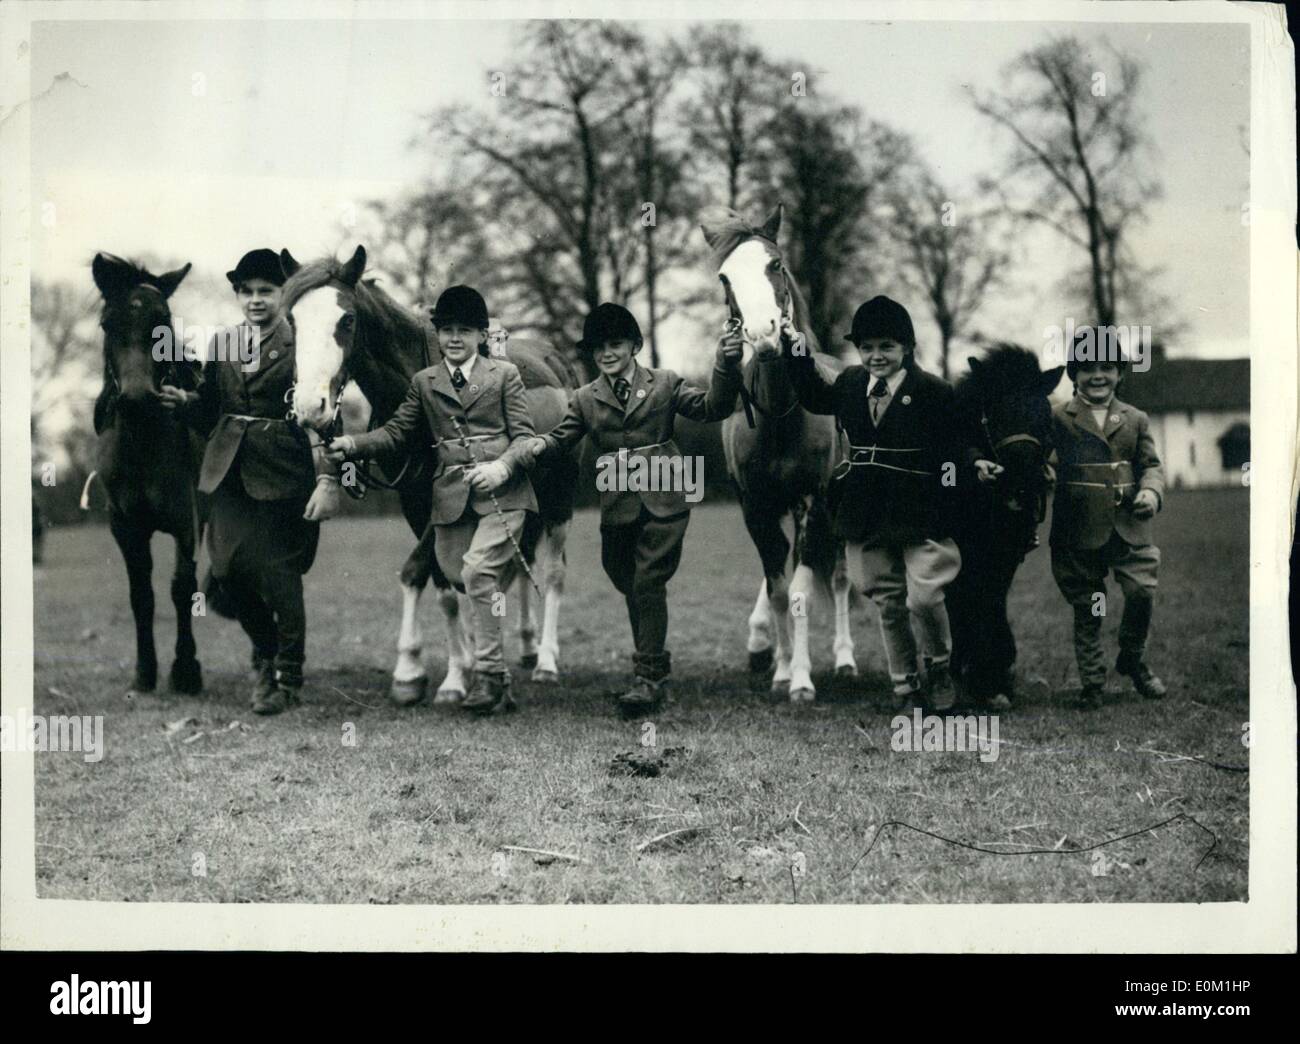 Apr. 04, 1953 - Children's Horse Show And Gymkhana: The 1953 Iver Village Children Horse Show and Gymkhana was held today at Huntsmoor Park, Iver. Photo shows Five competitors from one family - They are Carter family, of Romford. They are (L to R): Alistair, aged 11 Esther, 10, Edward, 8, Wendy, 7, and Diane, 6.. seen with their ponies at Iver today. Stock Photo